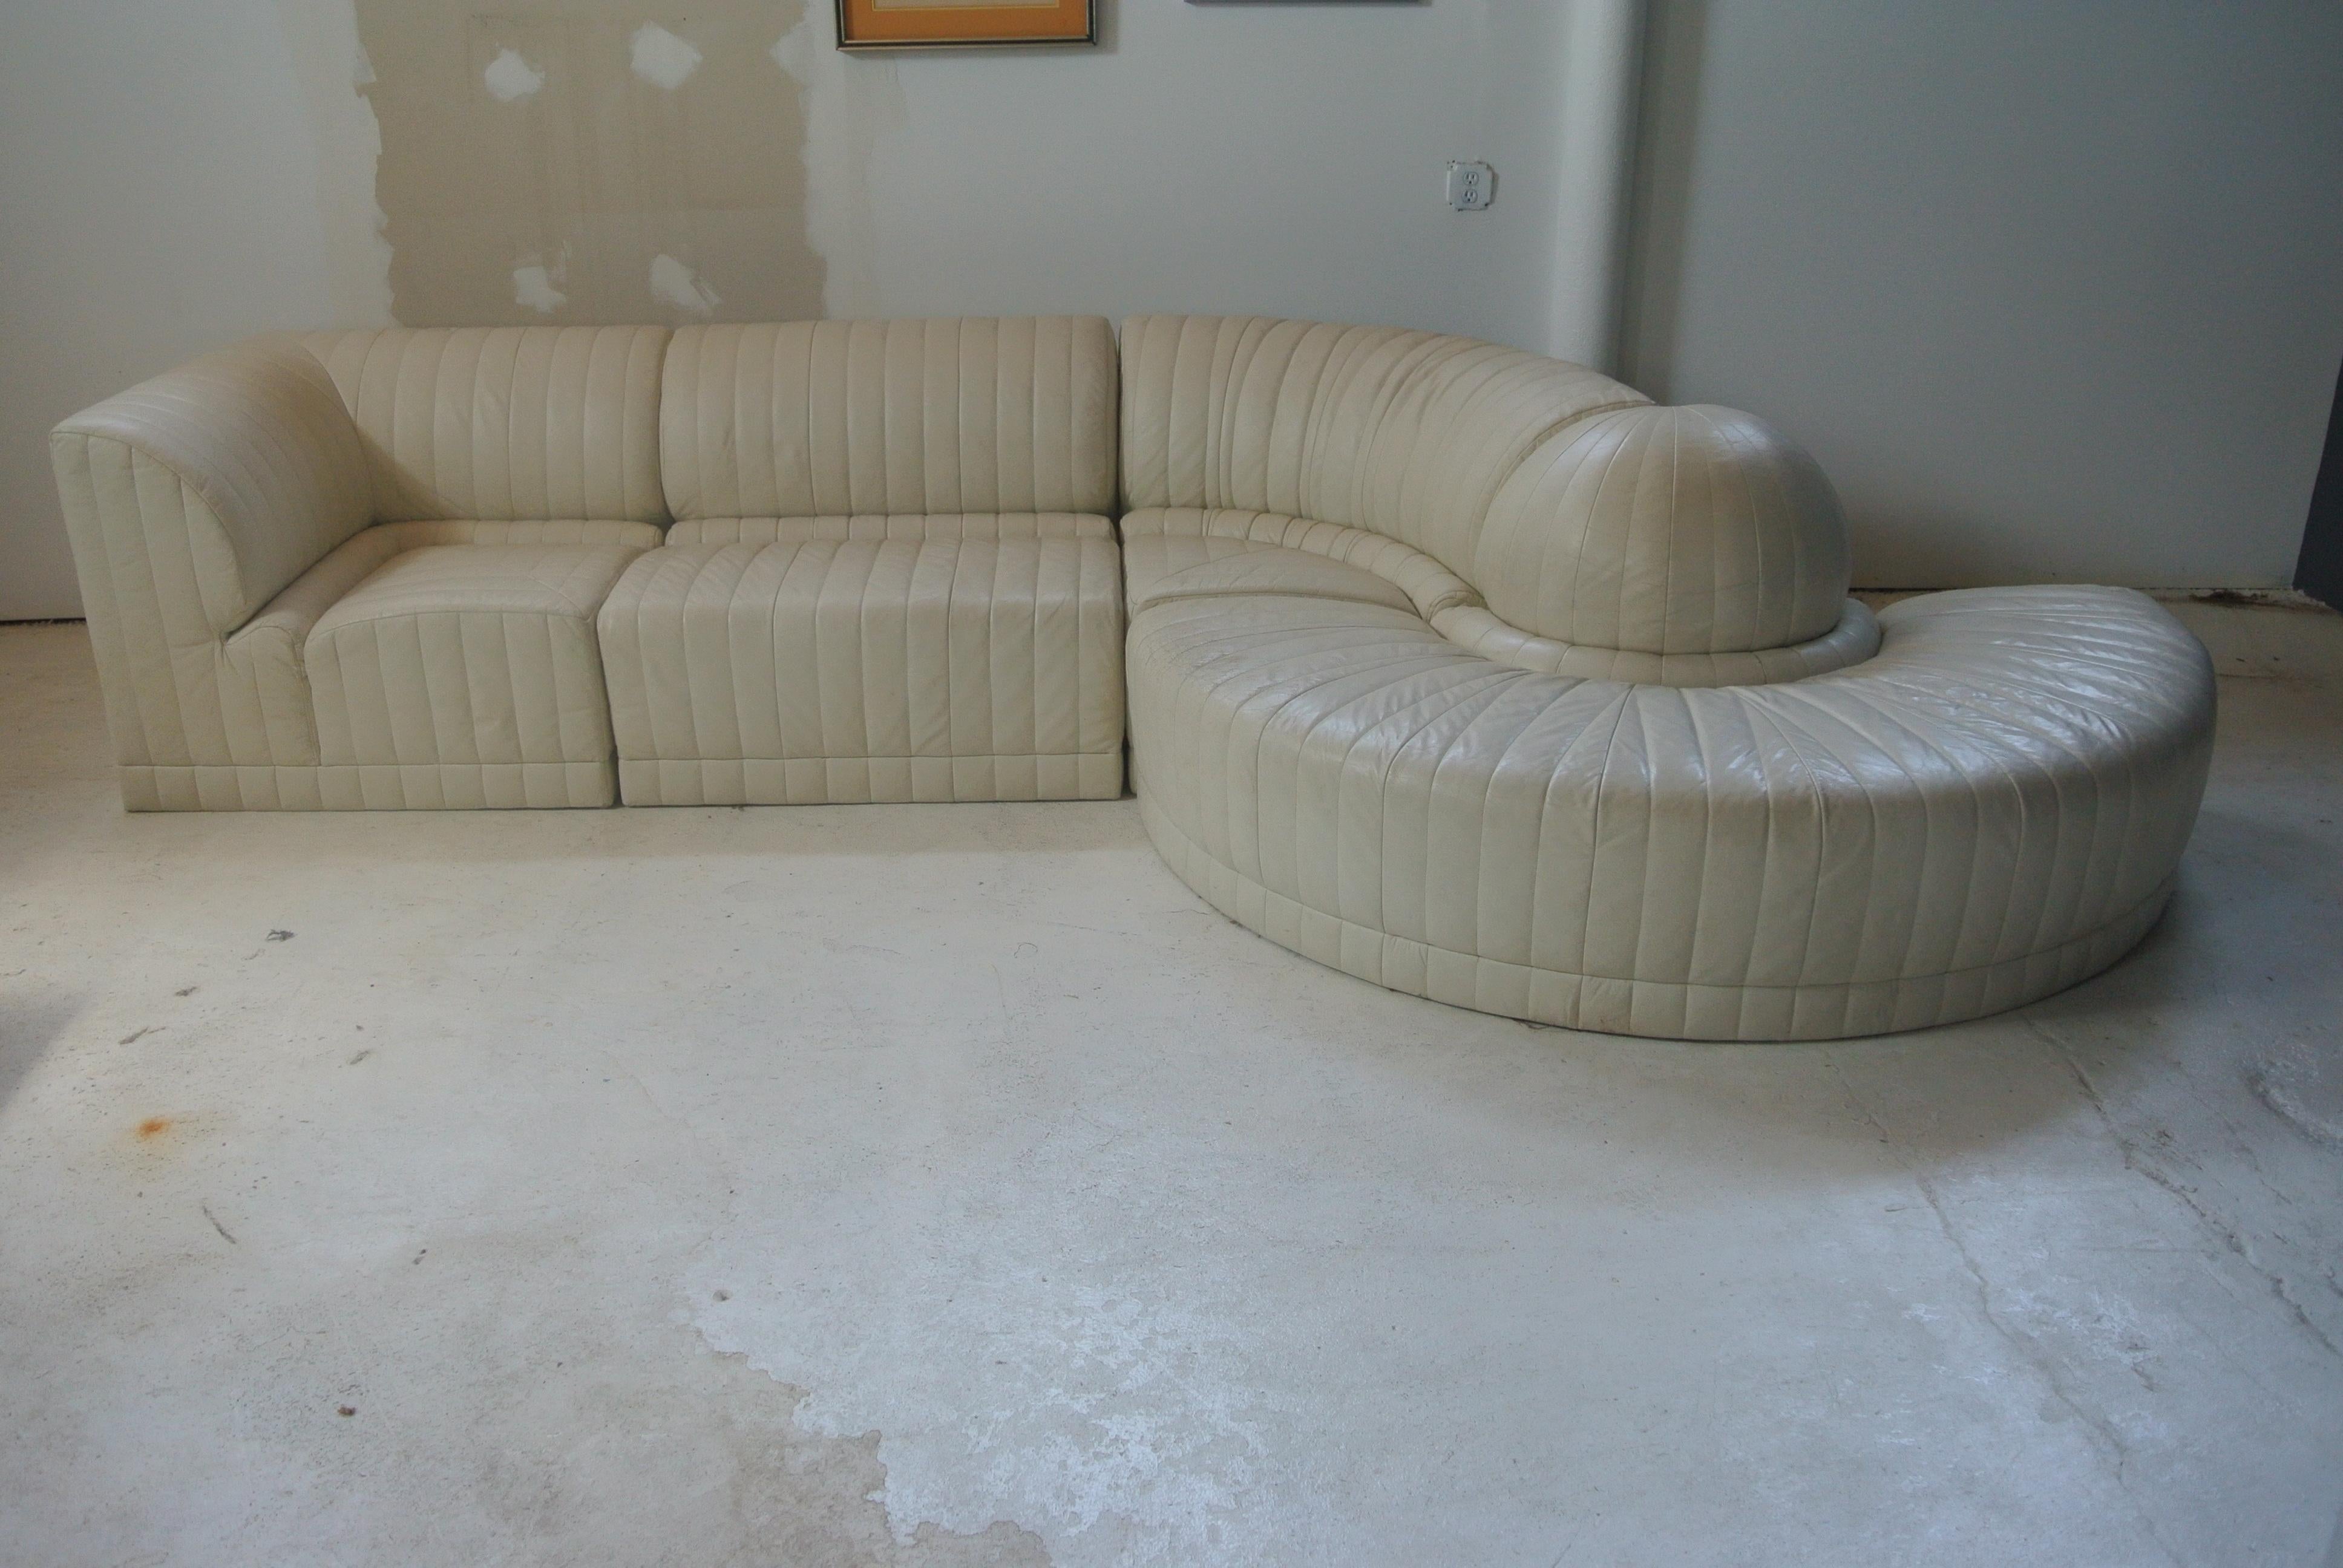 Beautiful four-piece white leather sectional by Roche Bobois. Pieces are interchangeable and can be shaped to fit any design.